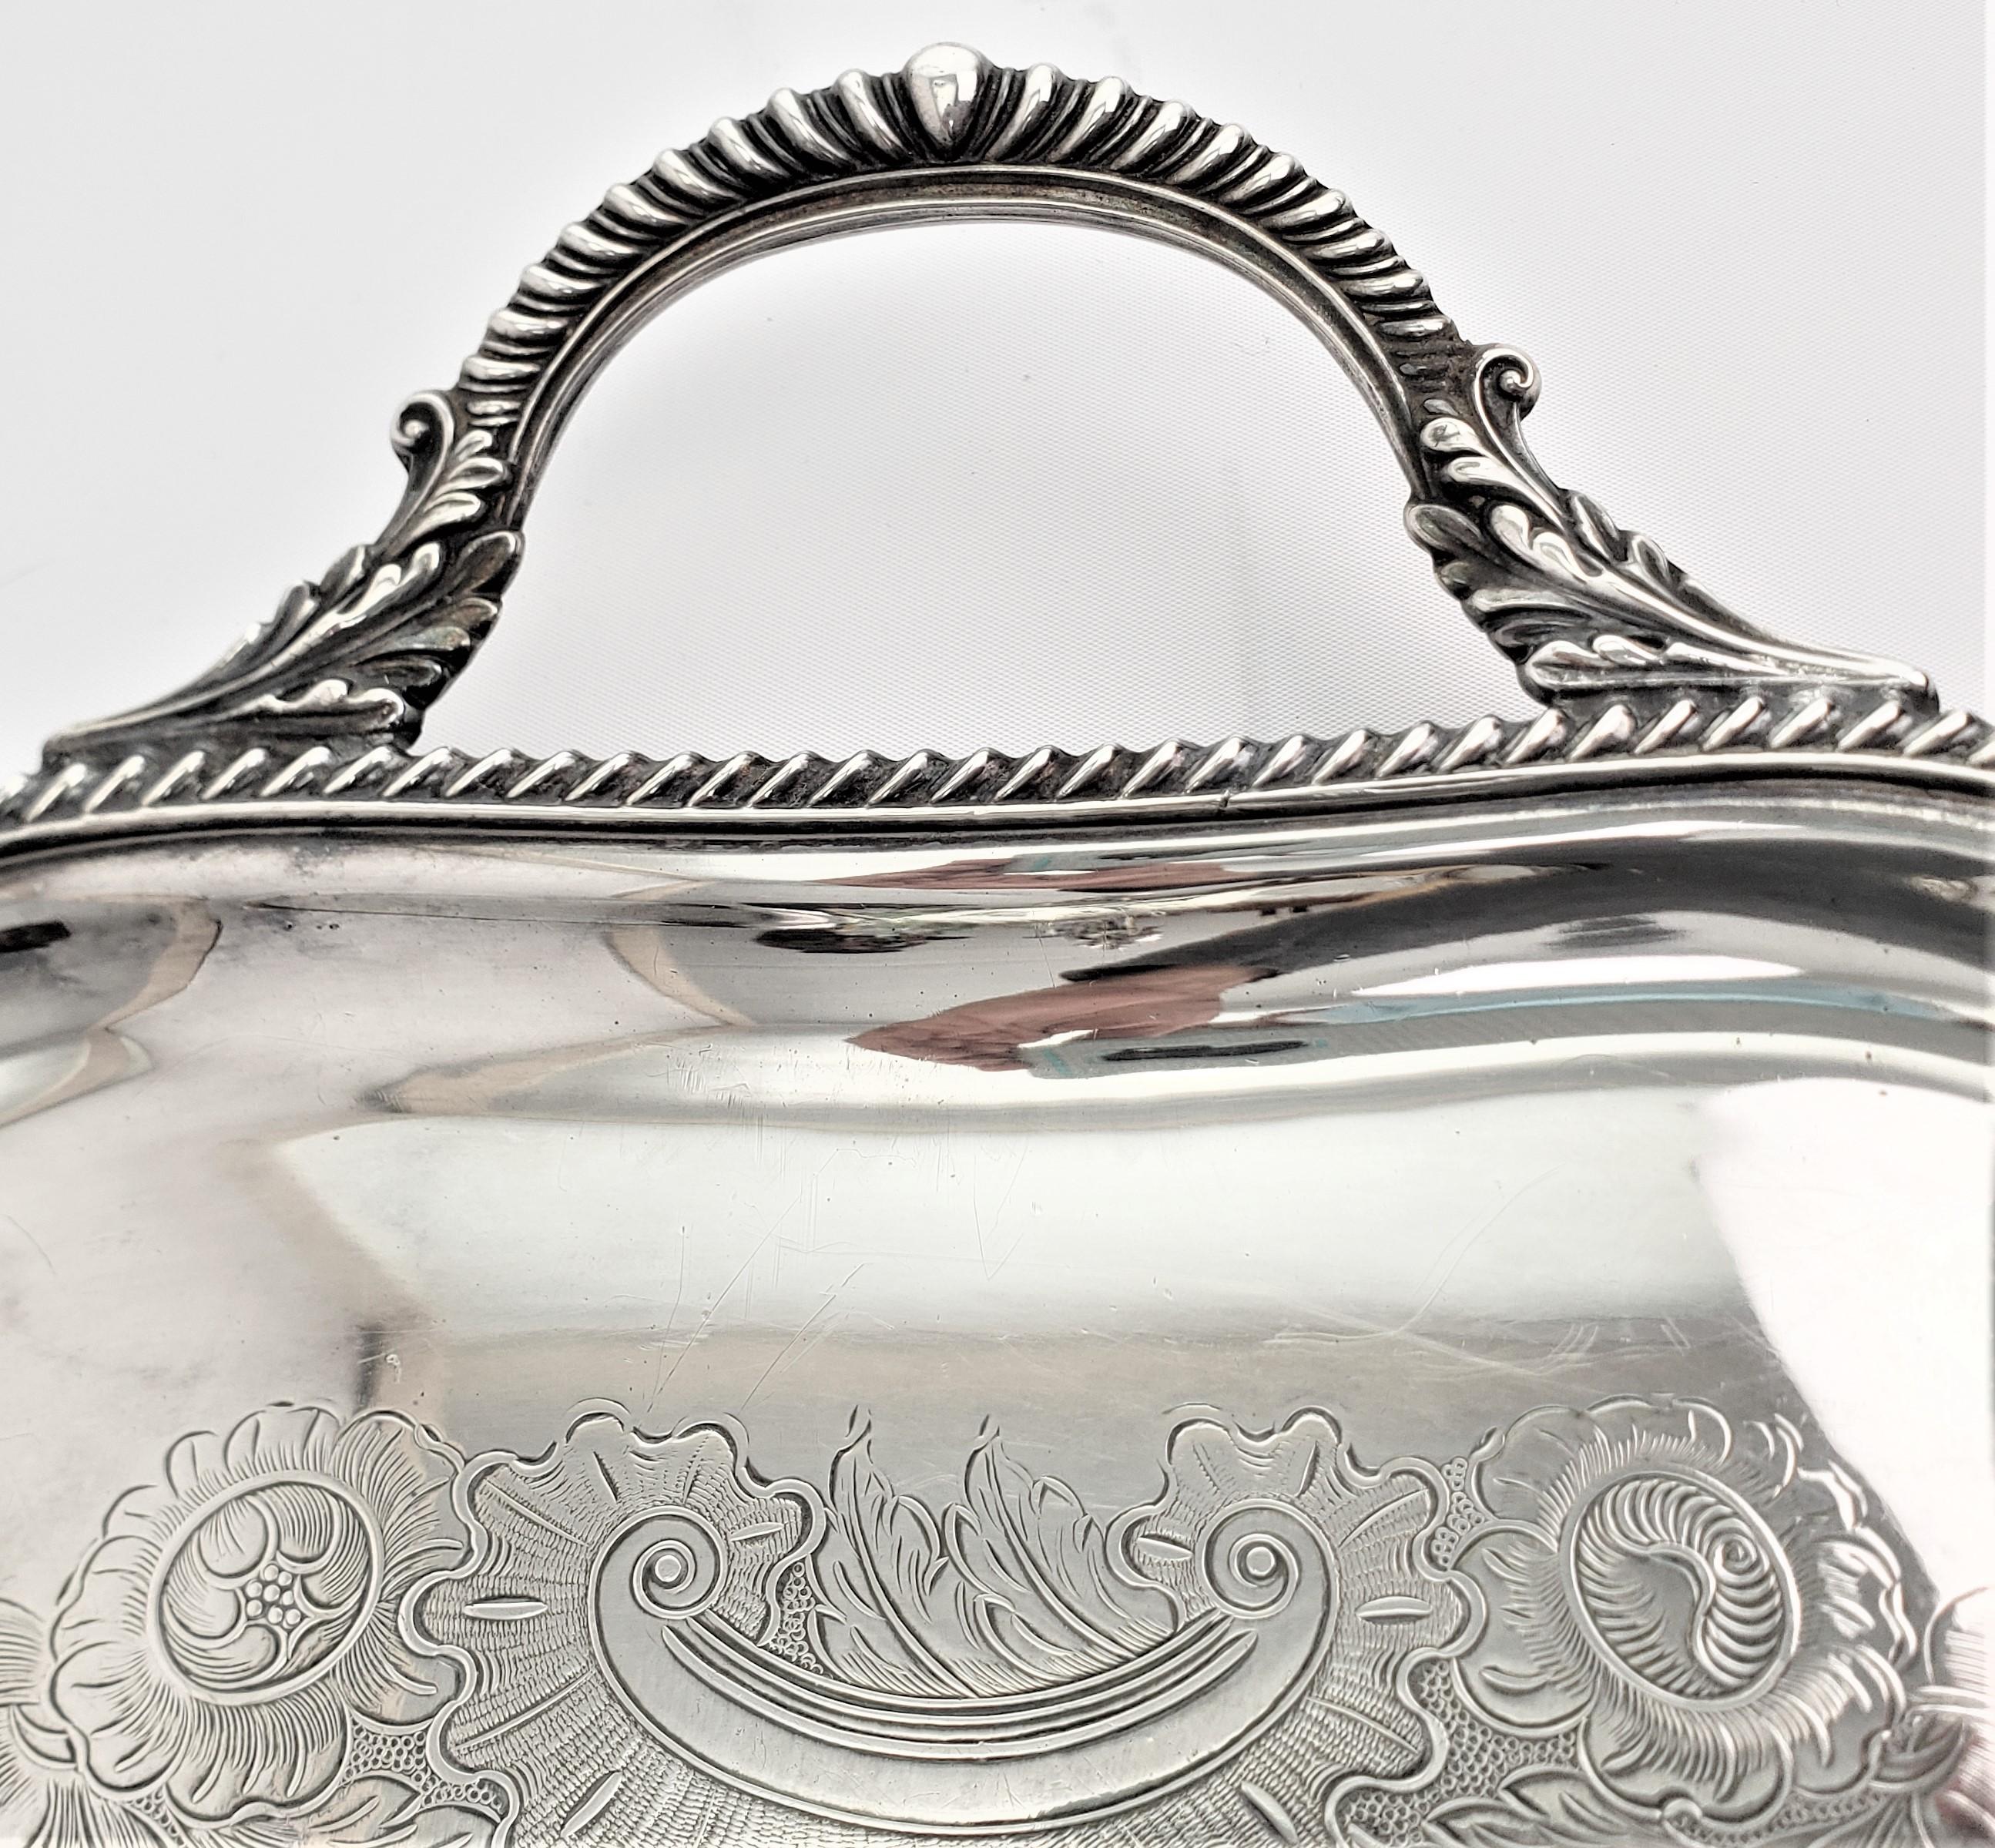 Antique Birks Silver Plated Rectangular Serving Tray with Floral Engraving In Good Condition For Sale In Hamilton, Ontario